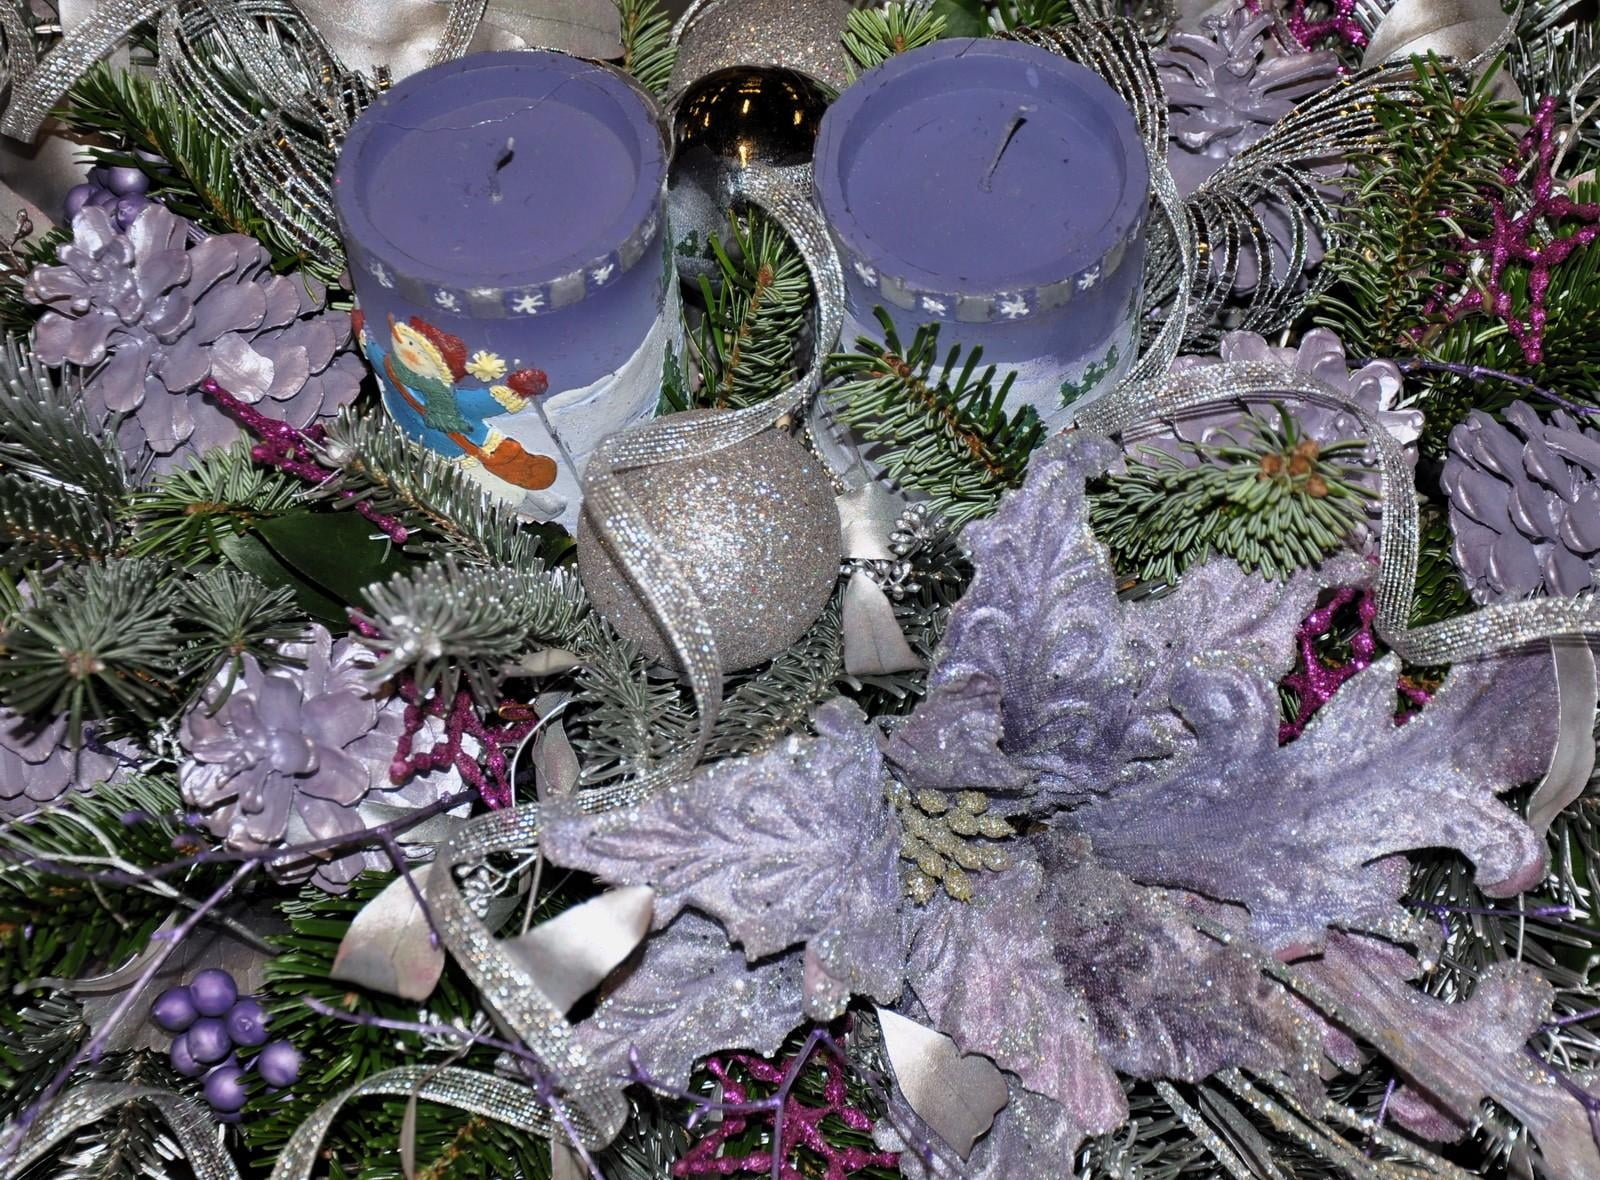 two purple pillar candle in middle of green wreath surrounded by pinecones and glittered Christmas baubles